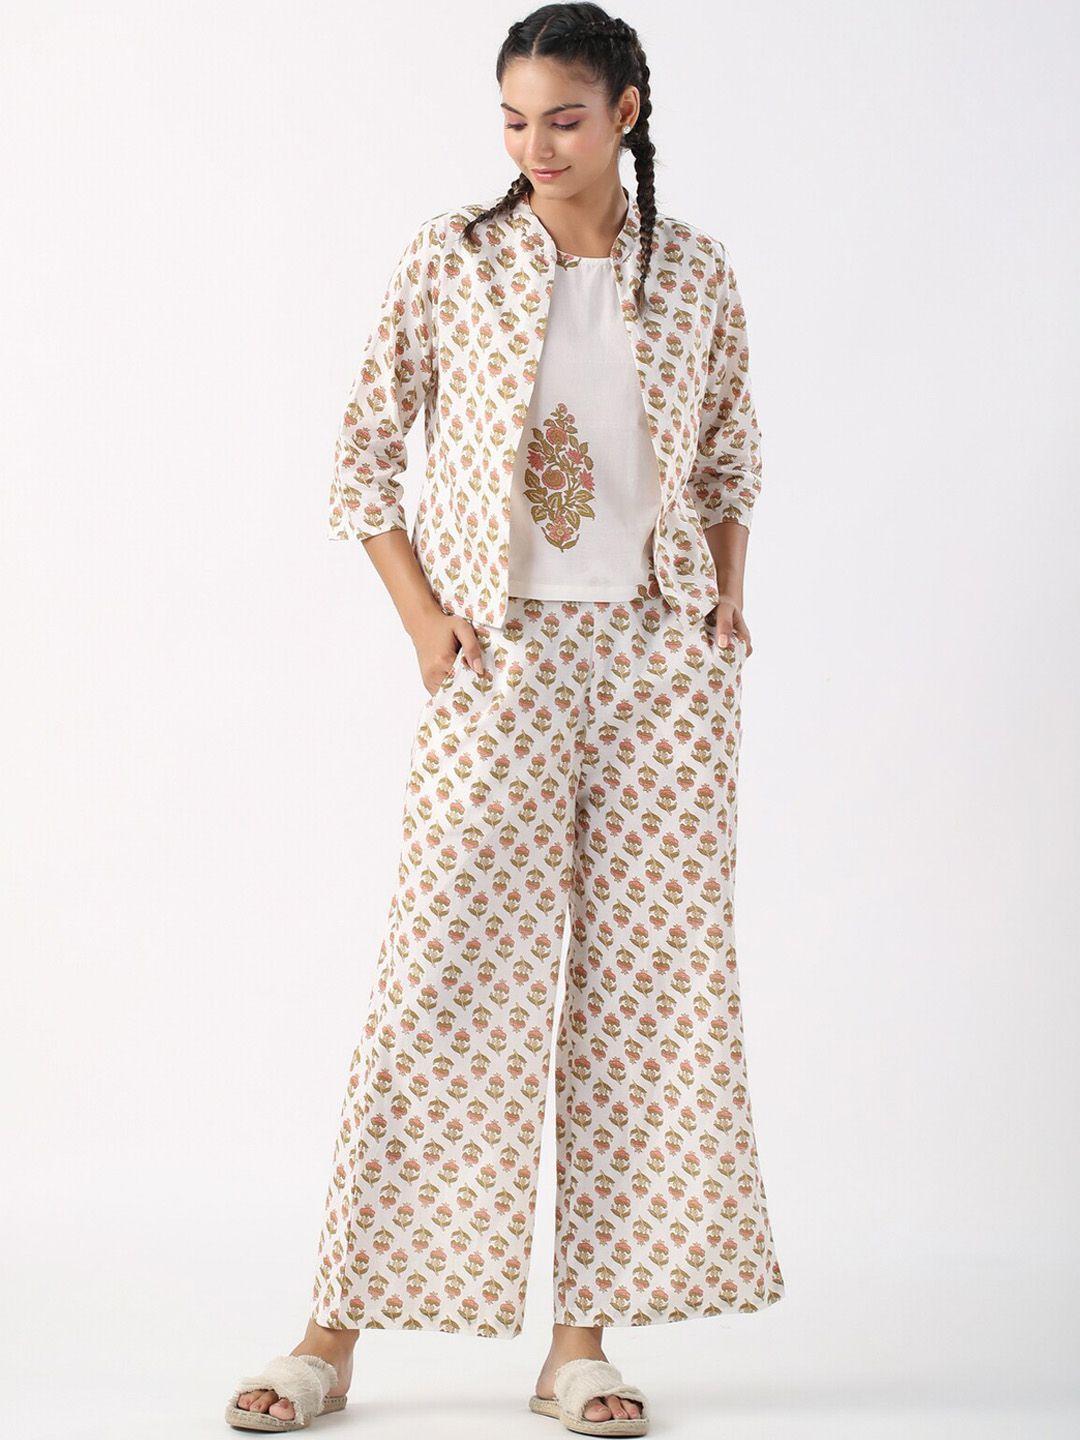 jisora off-white floral printed pure cotton night suit with shrug